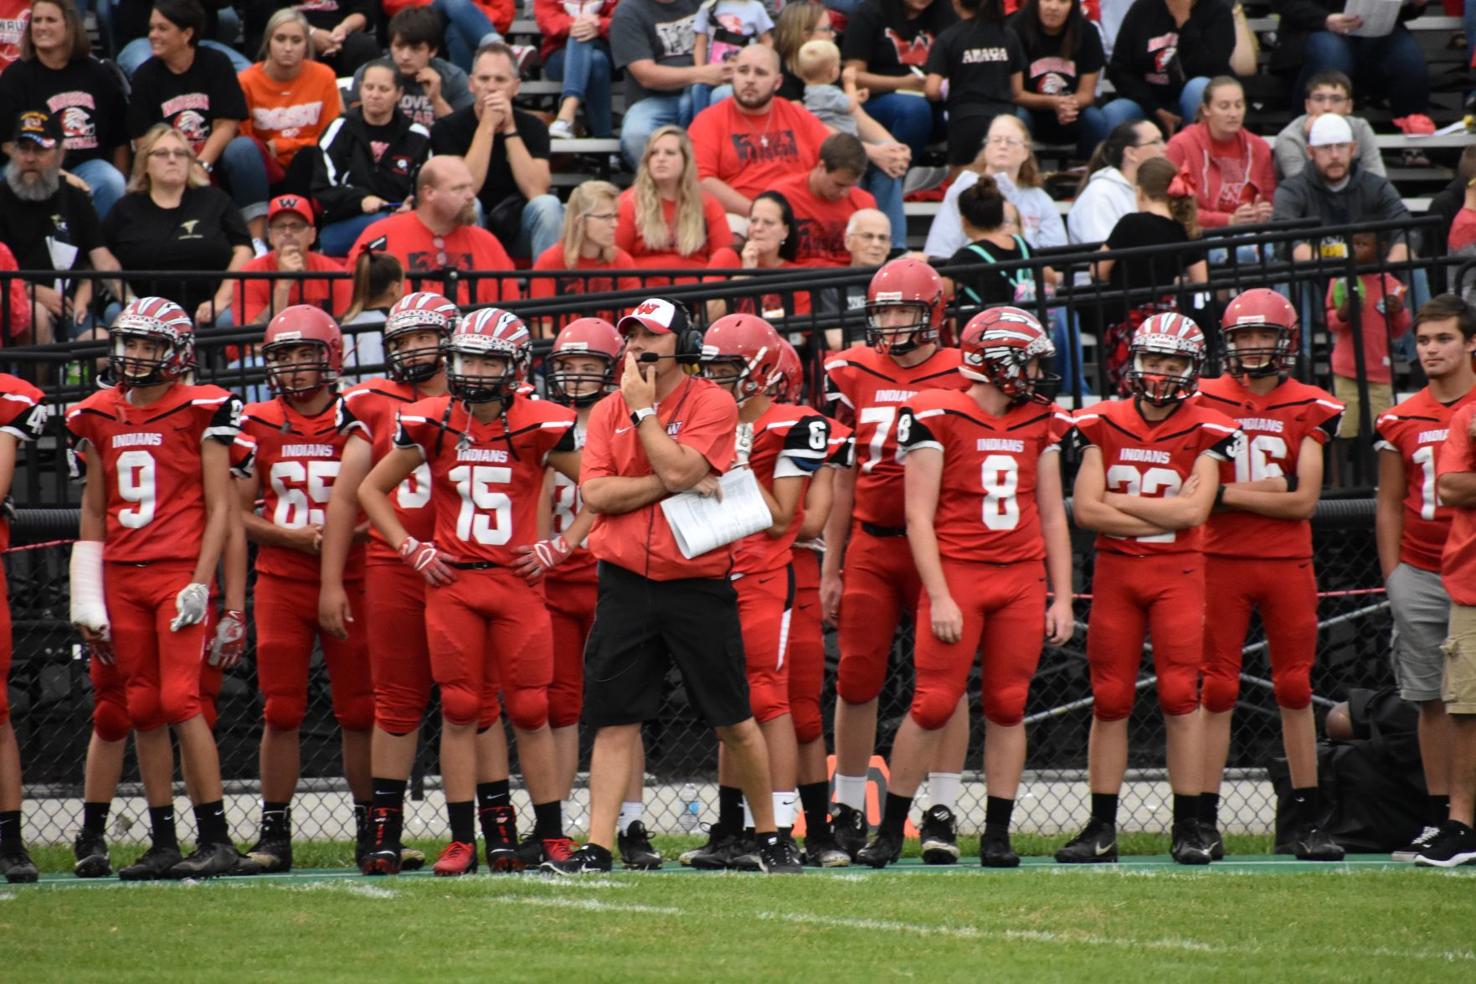 Wauseon football coach suspended for two games Local Sports